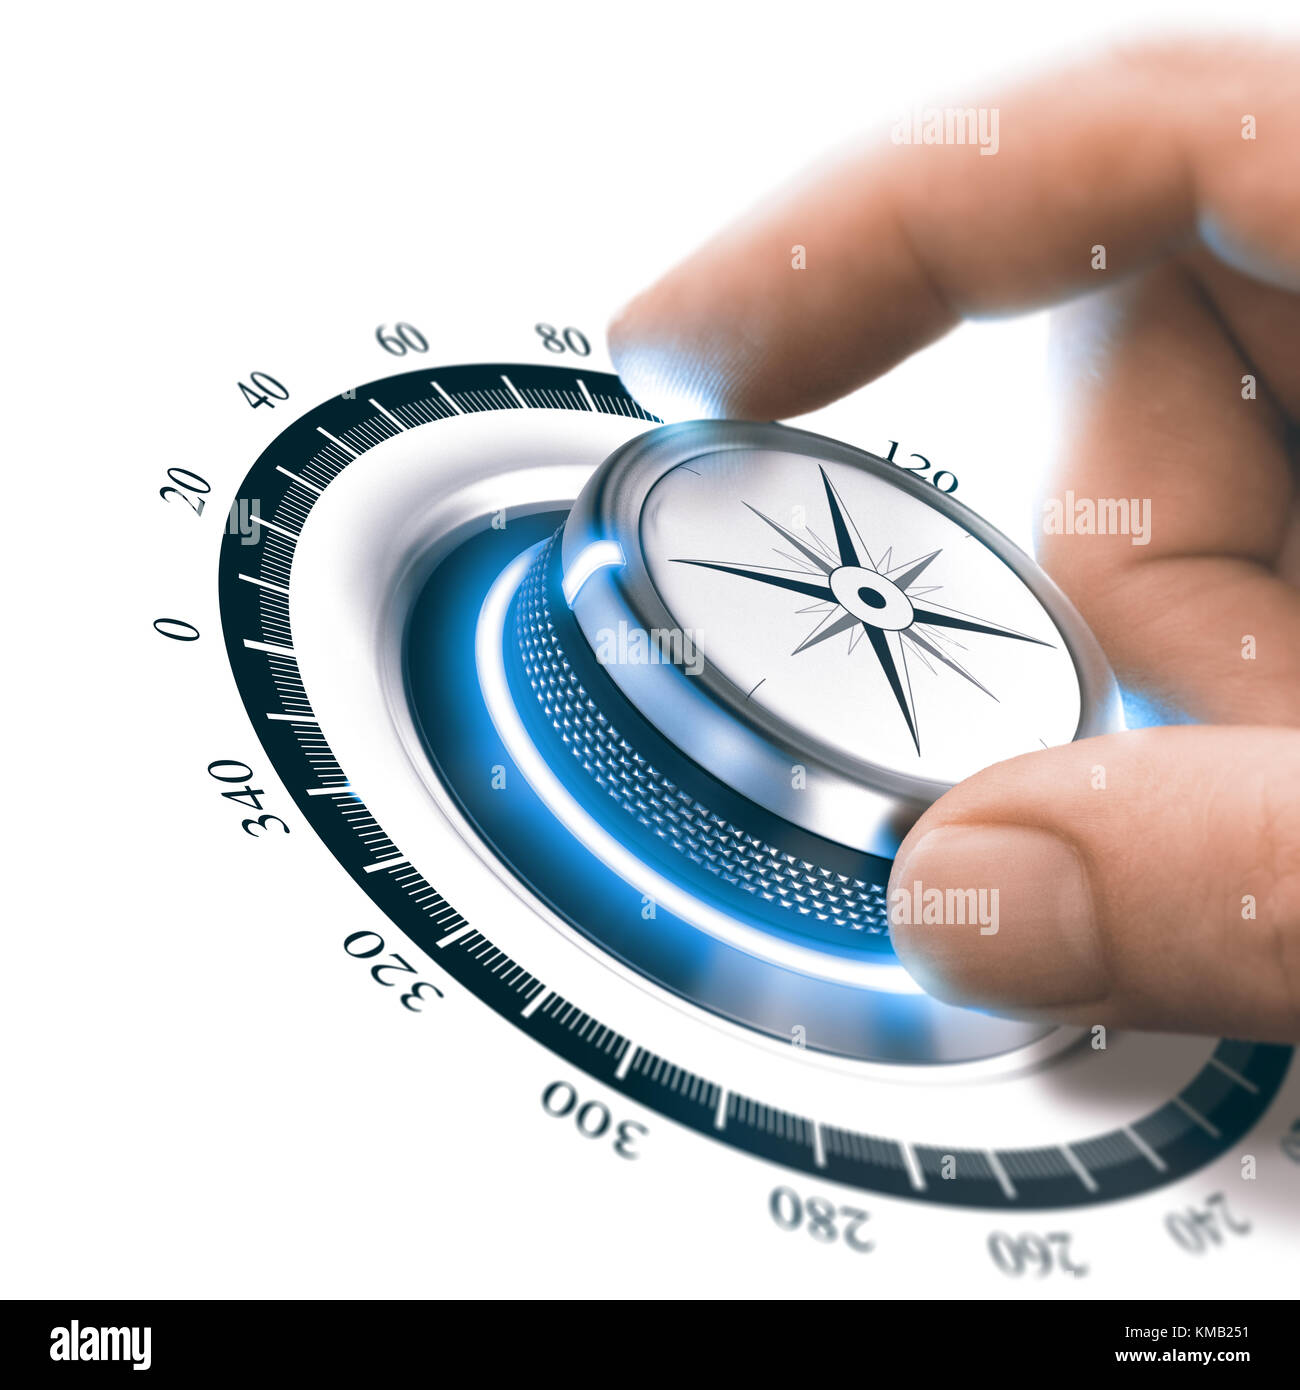 Hand turning a compass knob to the 360 degree position. Advertising or Marketing concept. Composite between a photography and a 3D background. Stock Photo